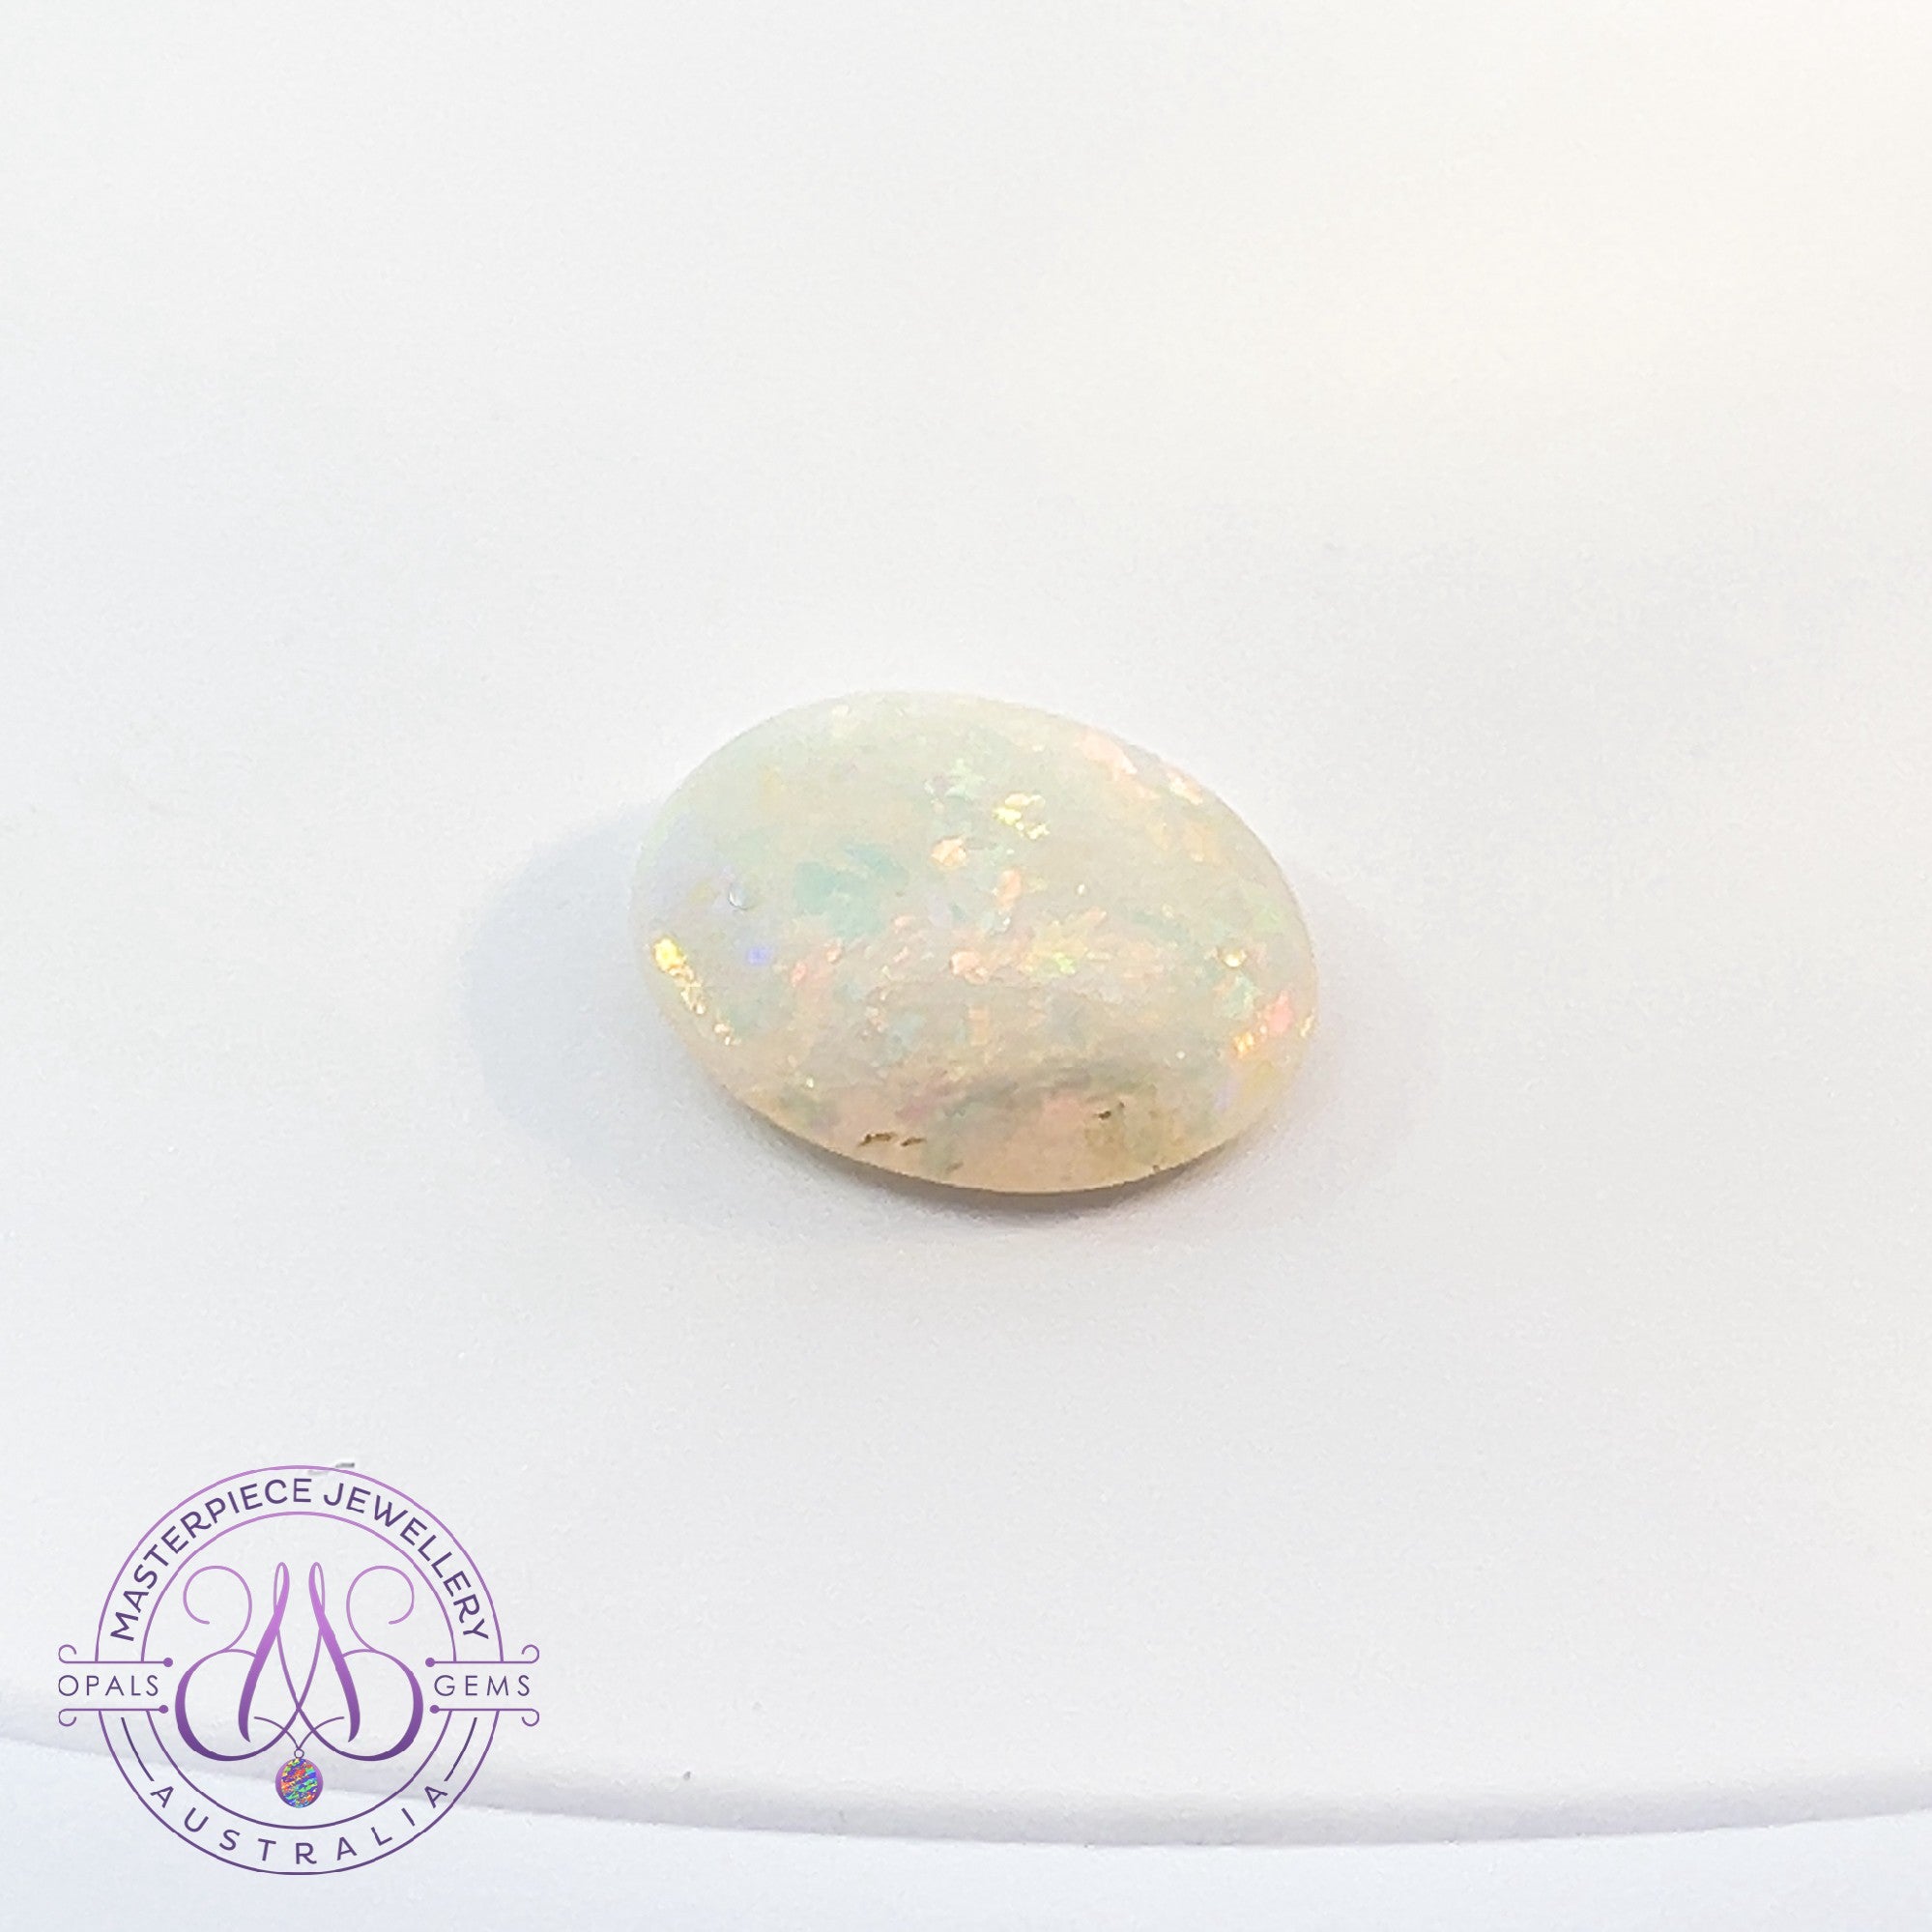 One loose Oval White Opal 3.07ct